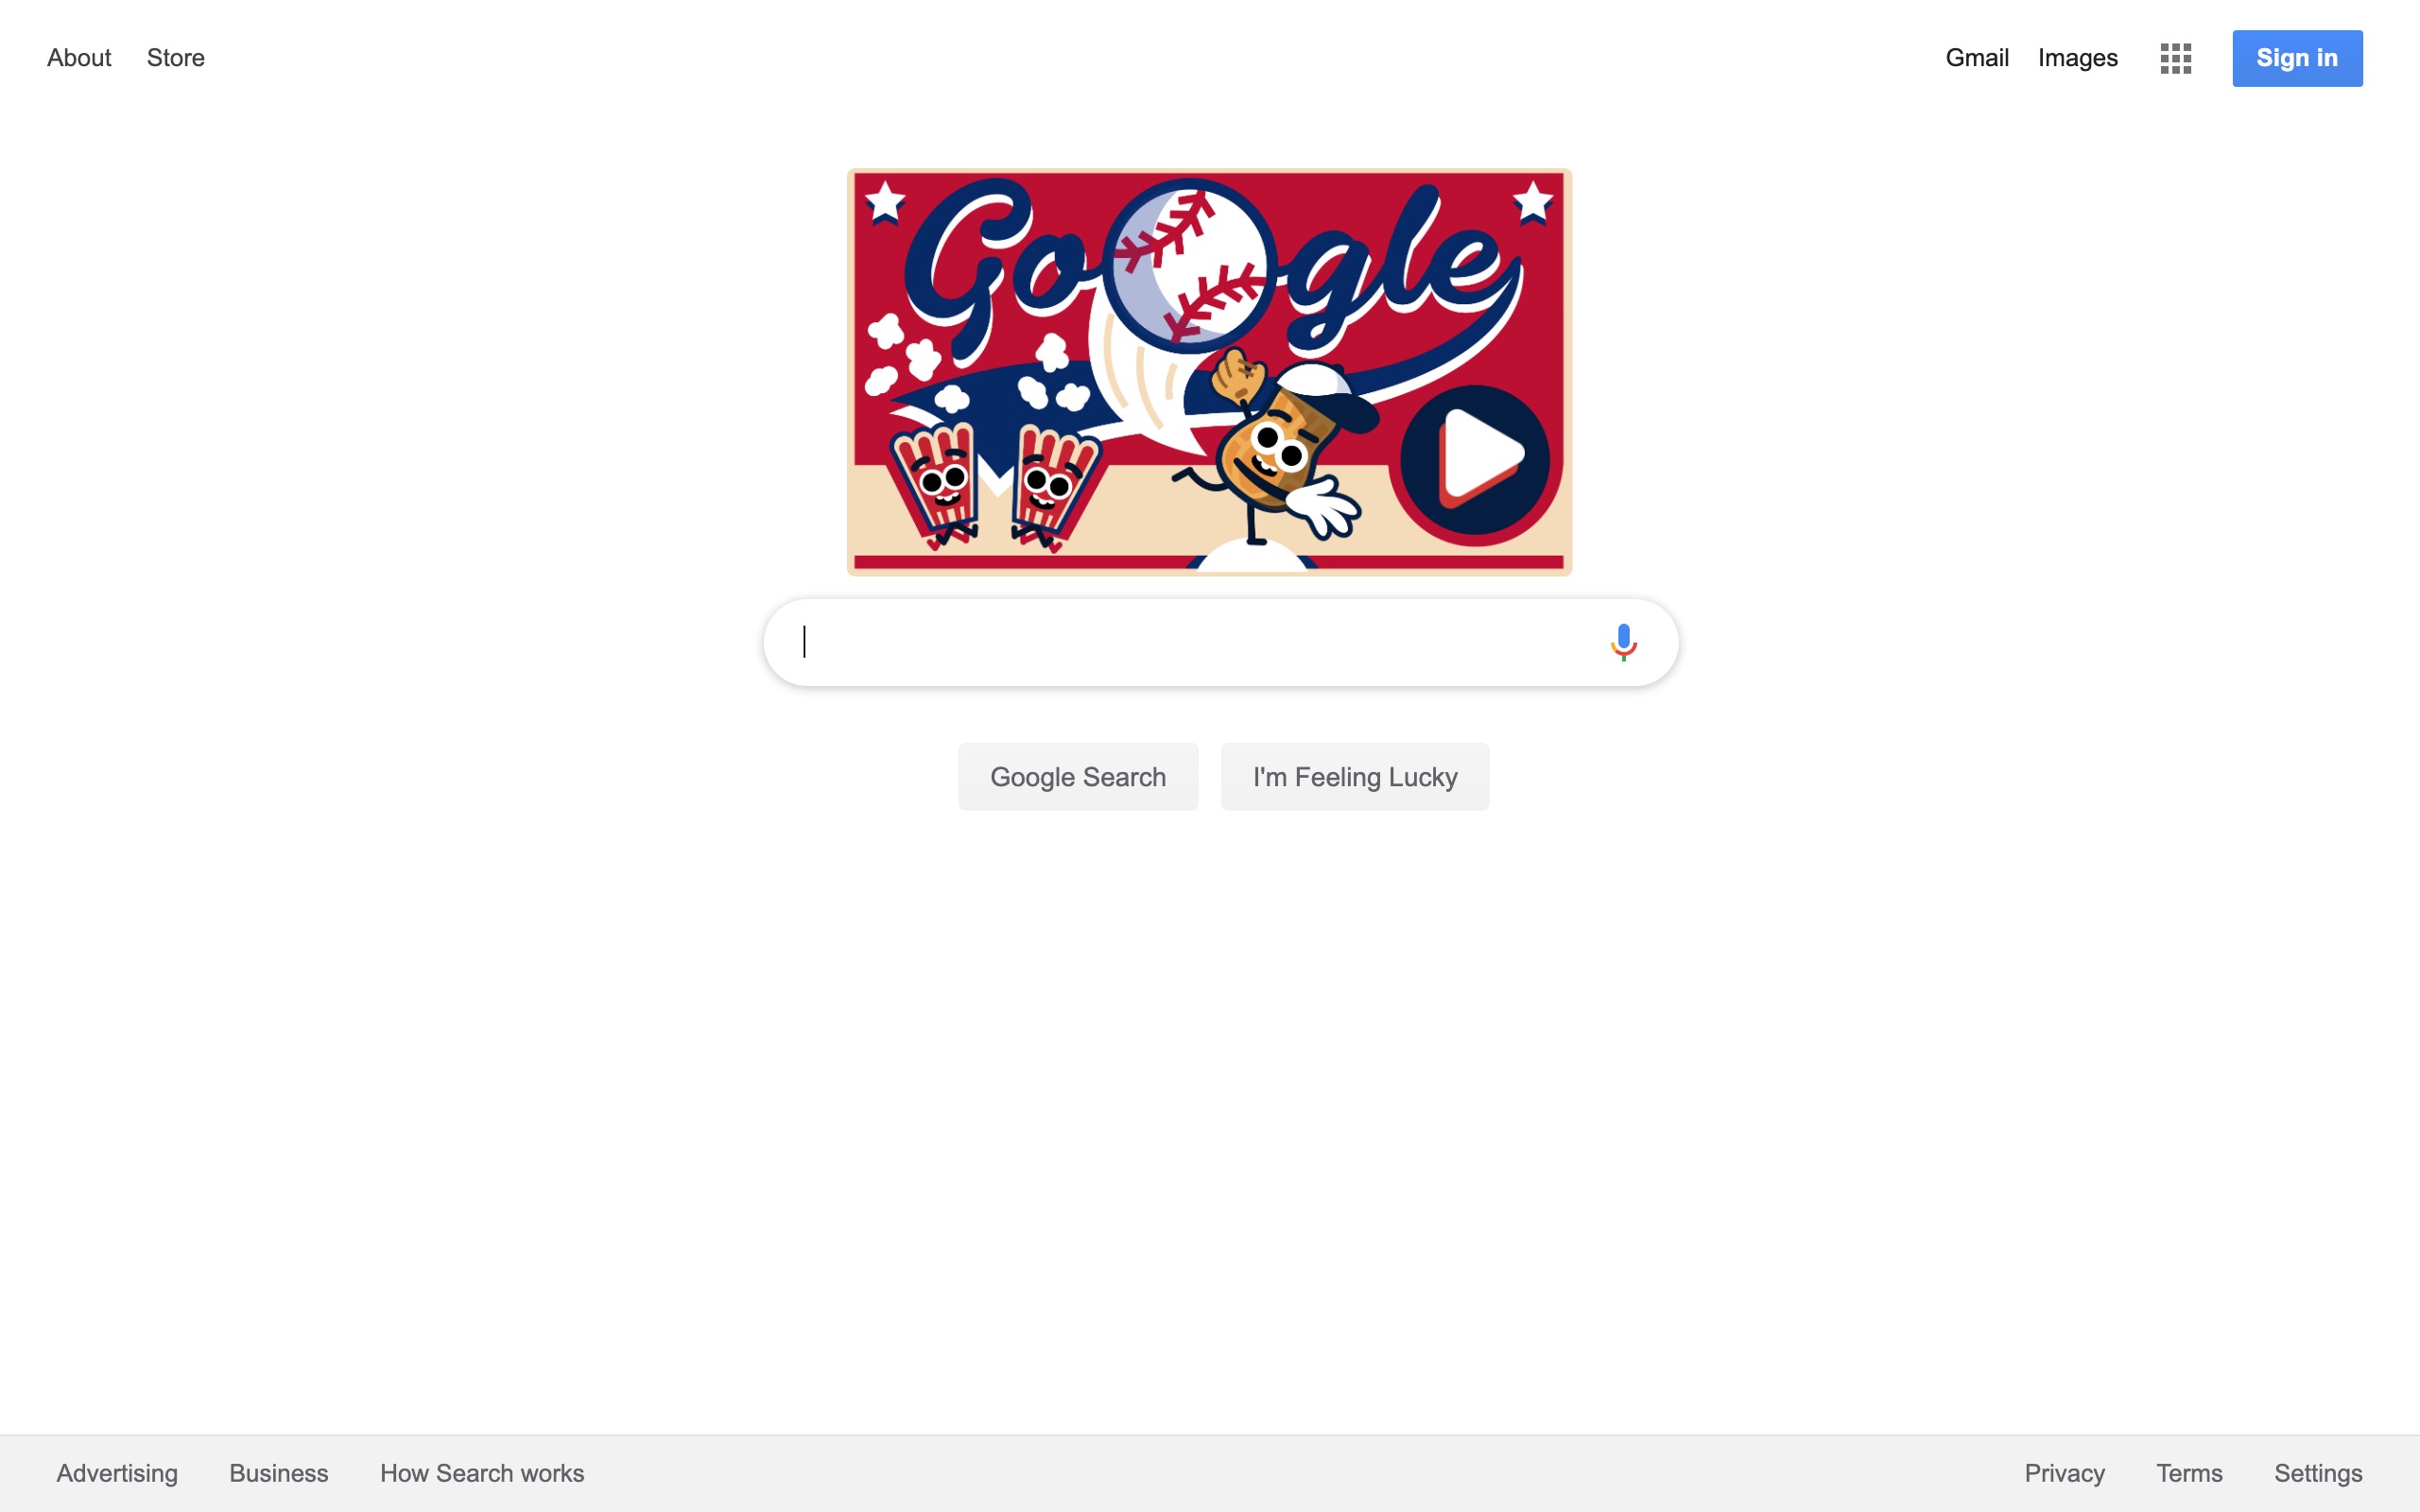 Google's 'Fourth of July' Doodle is a BBQ baseball game 9to5Google